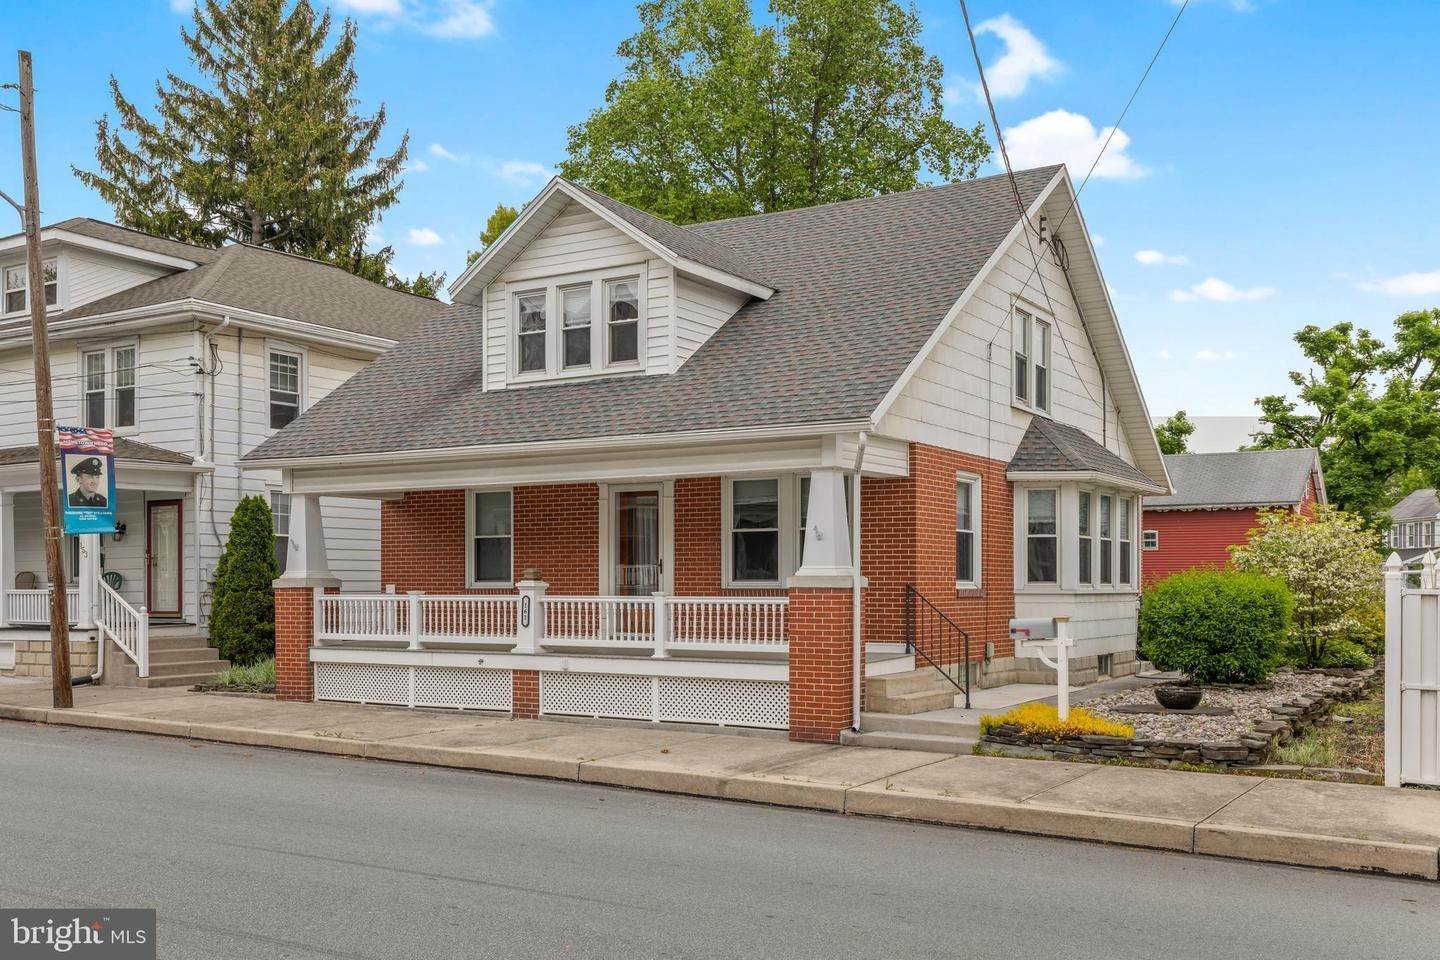 2. Residential for Sale at 161 NEW HAVEN Street Mount Joy, Pennsylvania 17552 United States